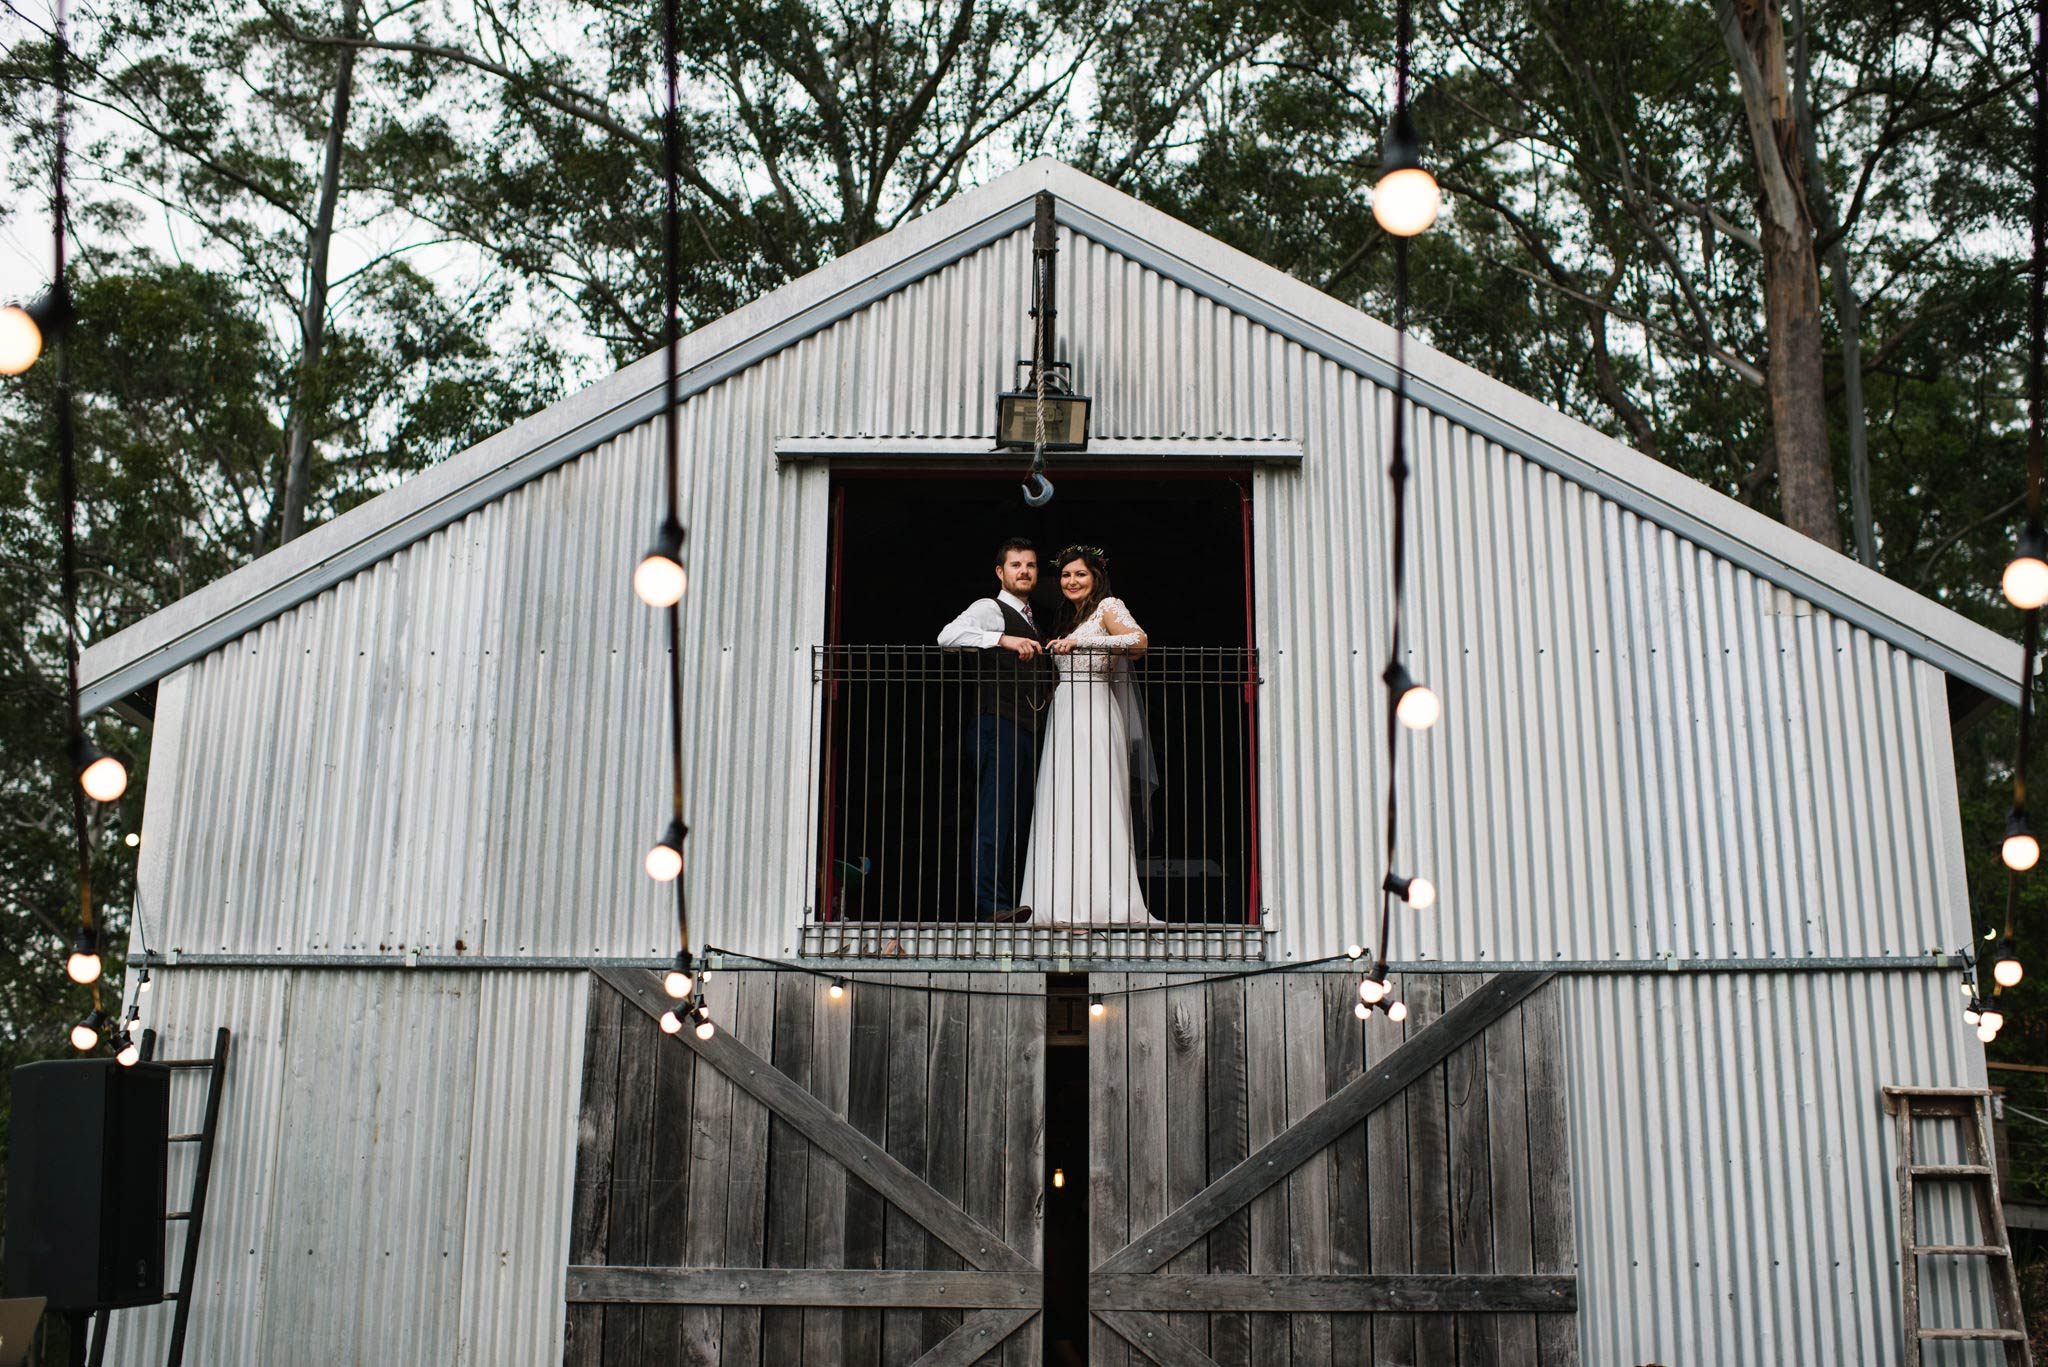 Bride and groom posing in the upper window of a barn